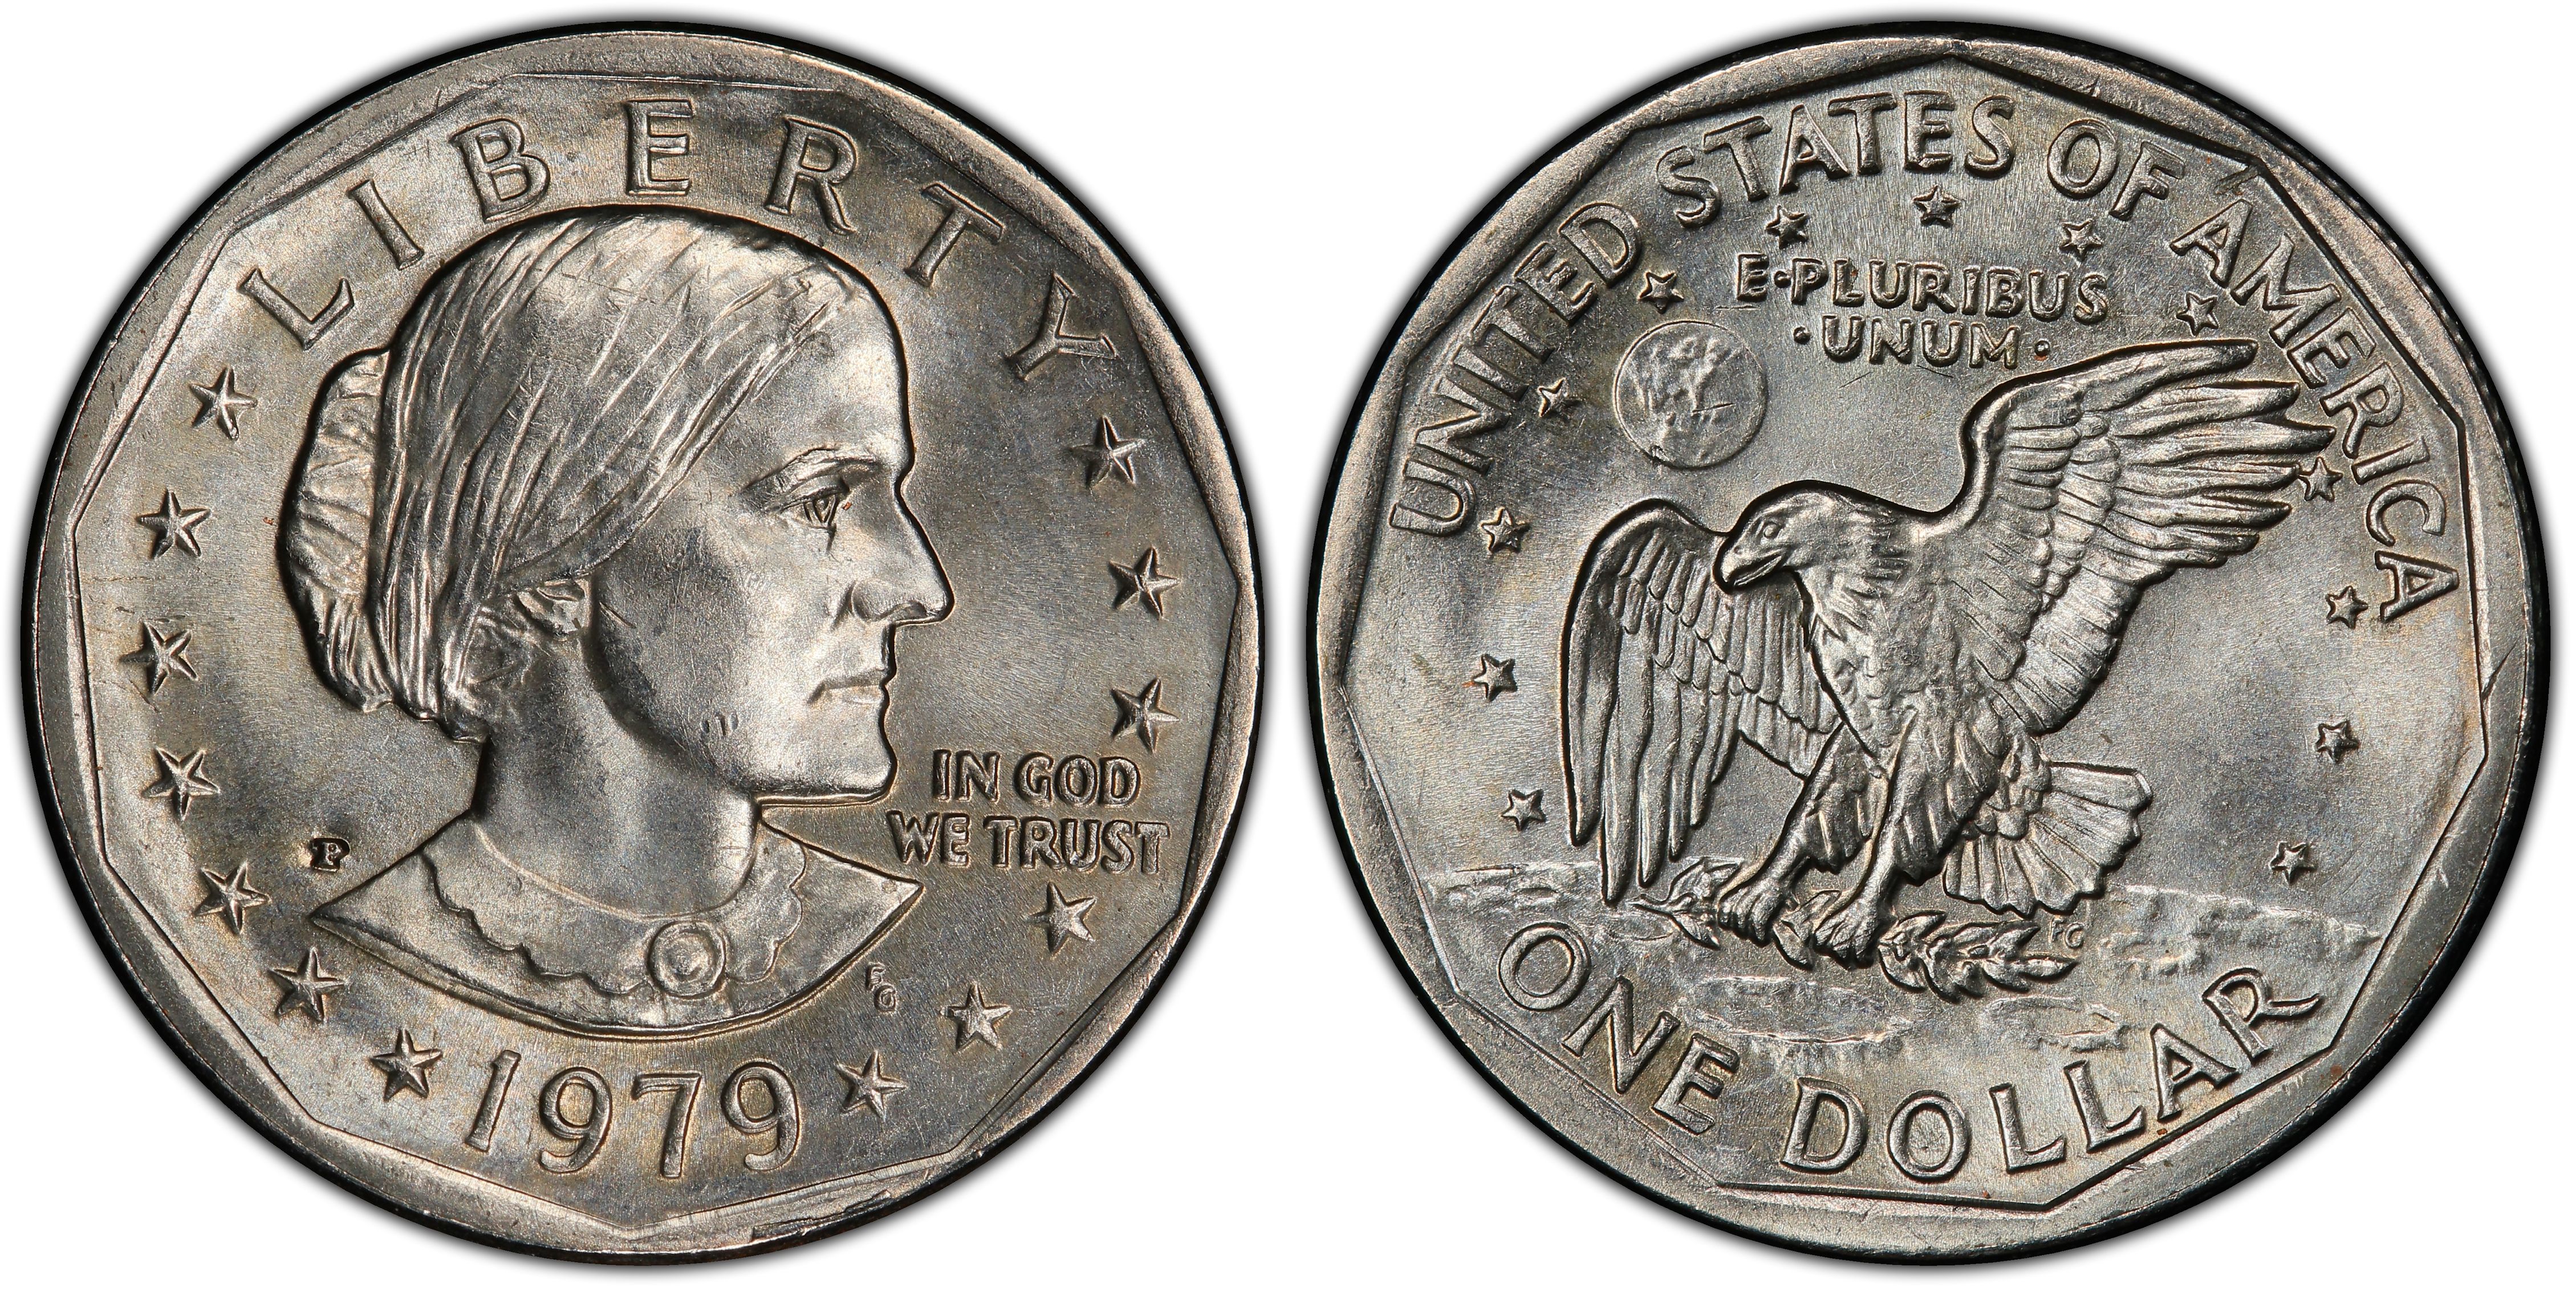 Images of Susan B. Anthony Dollar 1979-P SBA$1 - PCGS CoinFacts